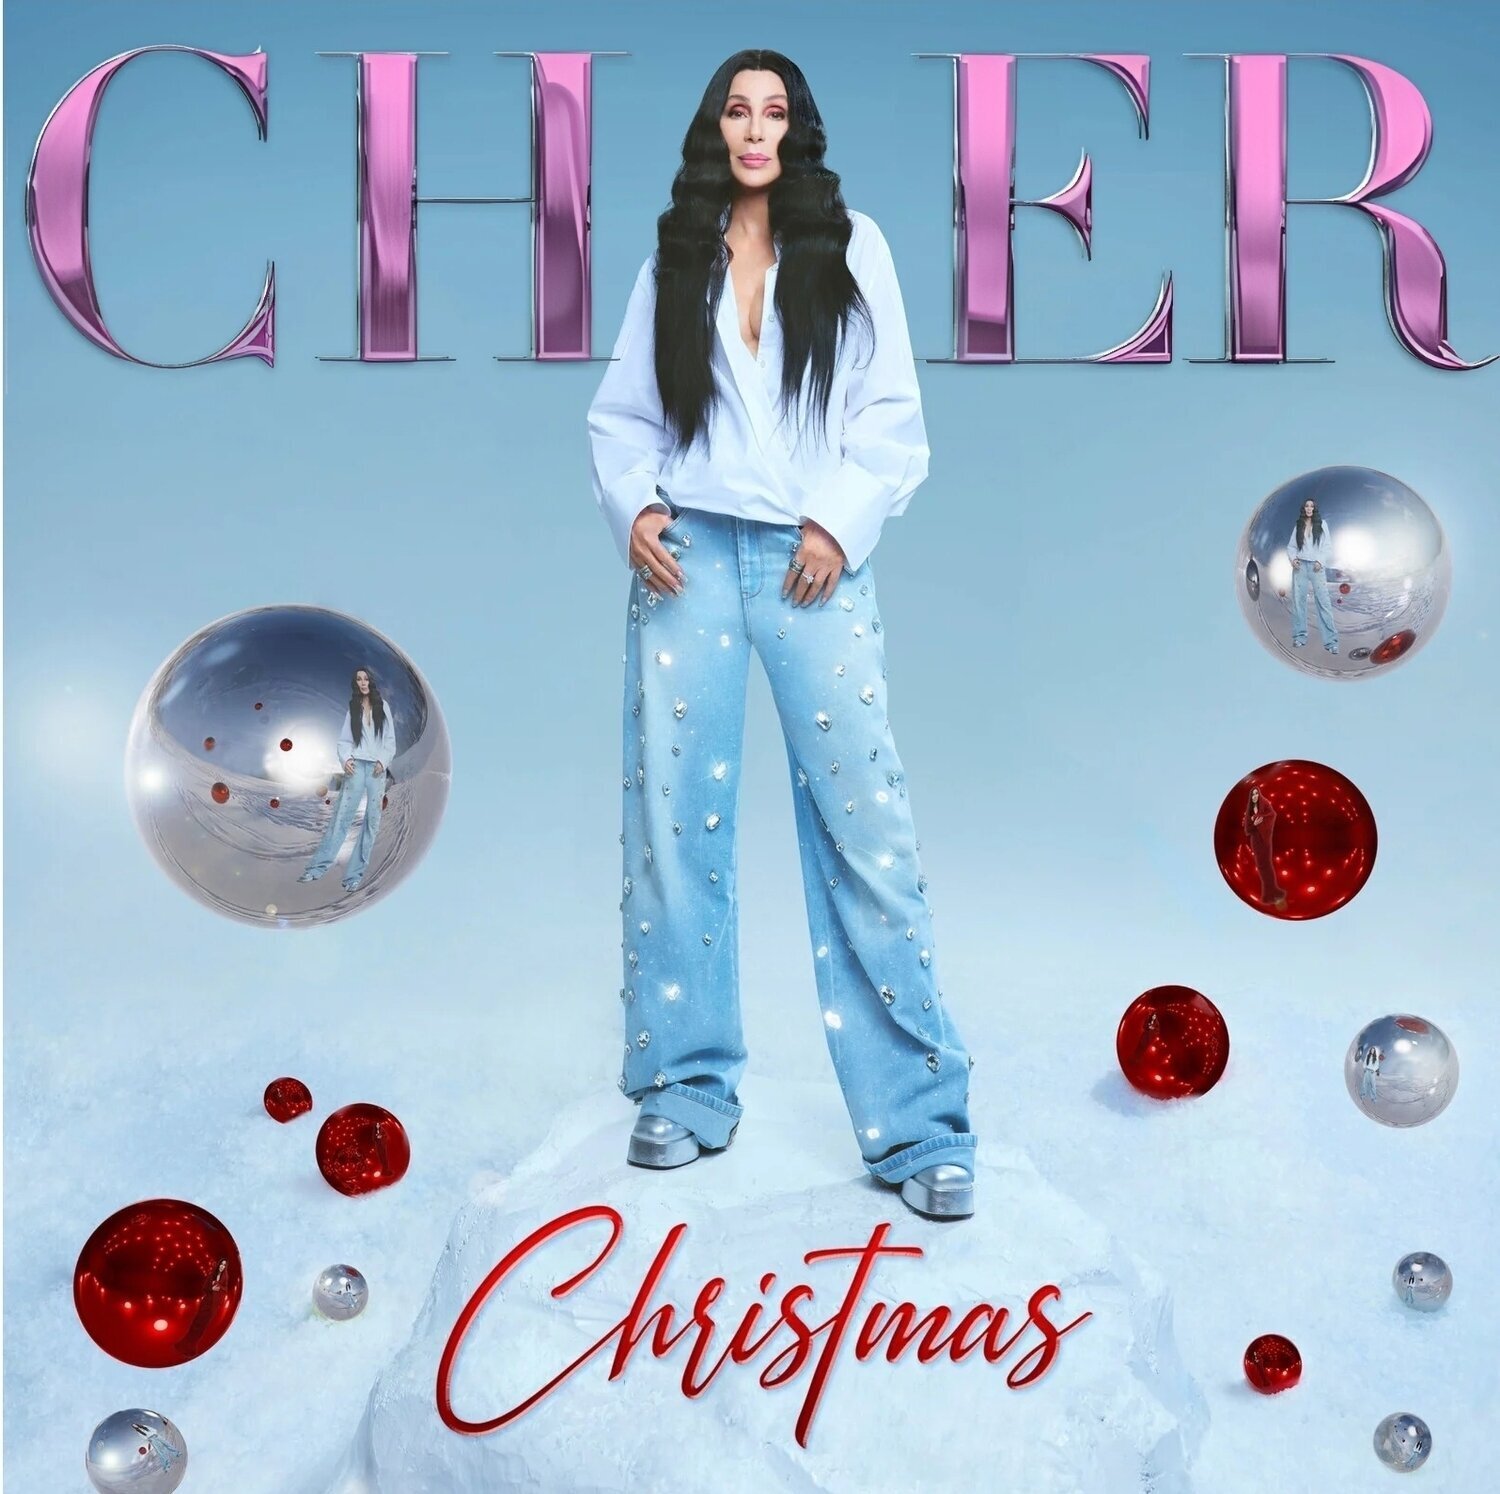 Cher - Christmas (Pink Cover) (CD) Cher